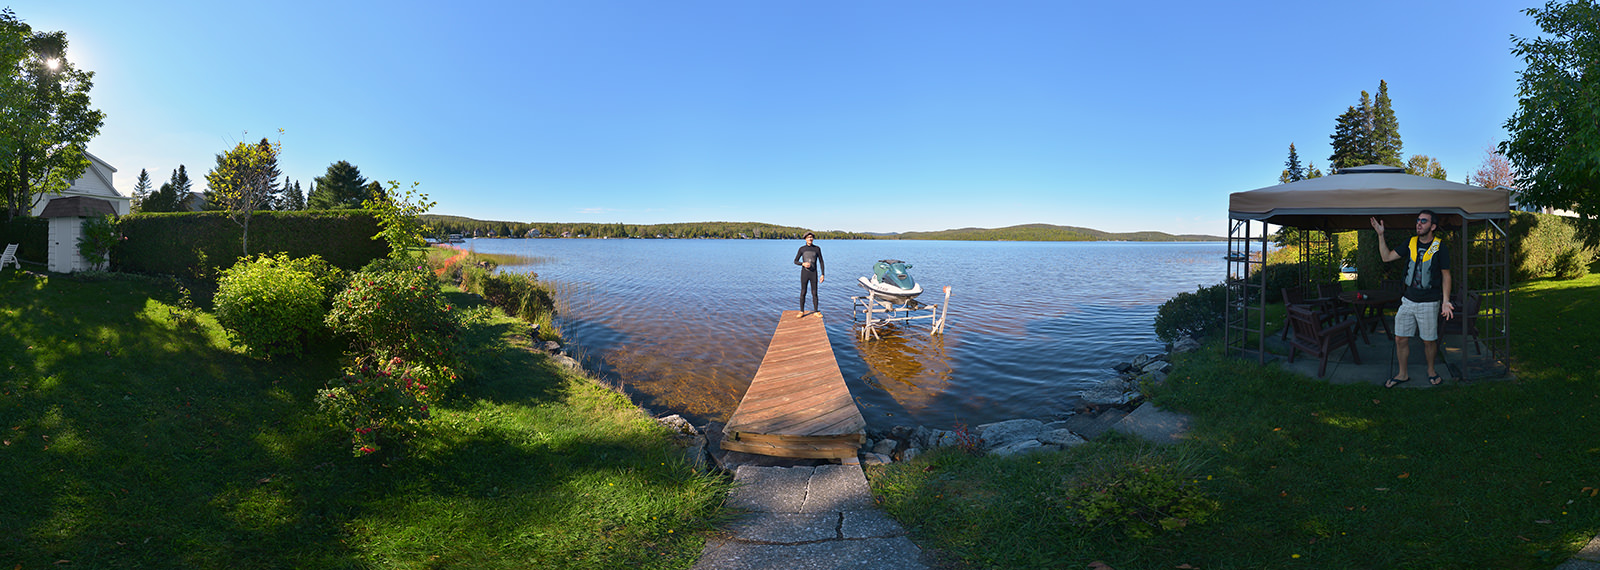 Wakeboard afternoon, Thetford Mines - Virtual tour